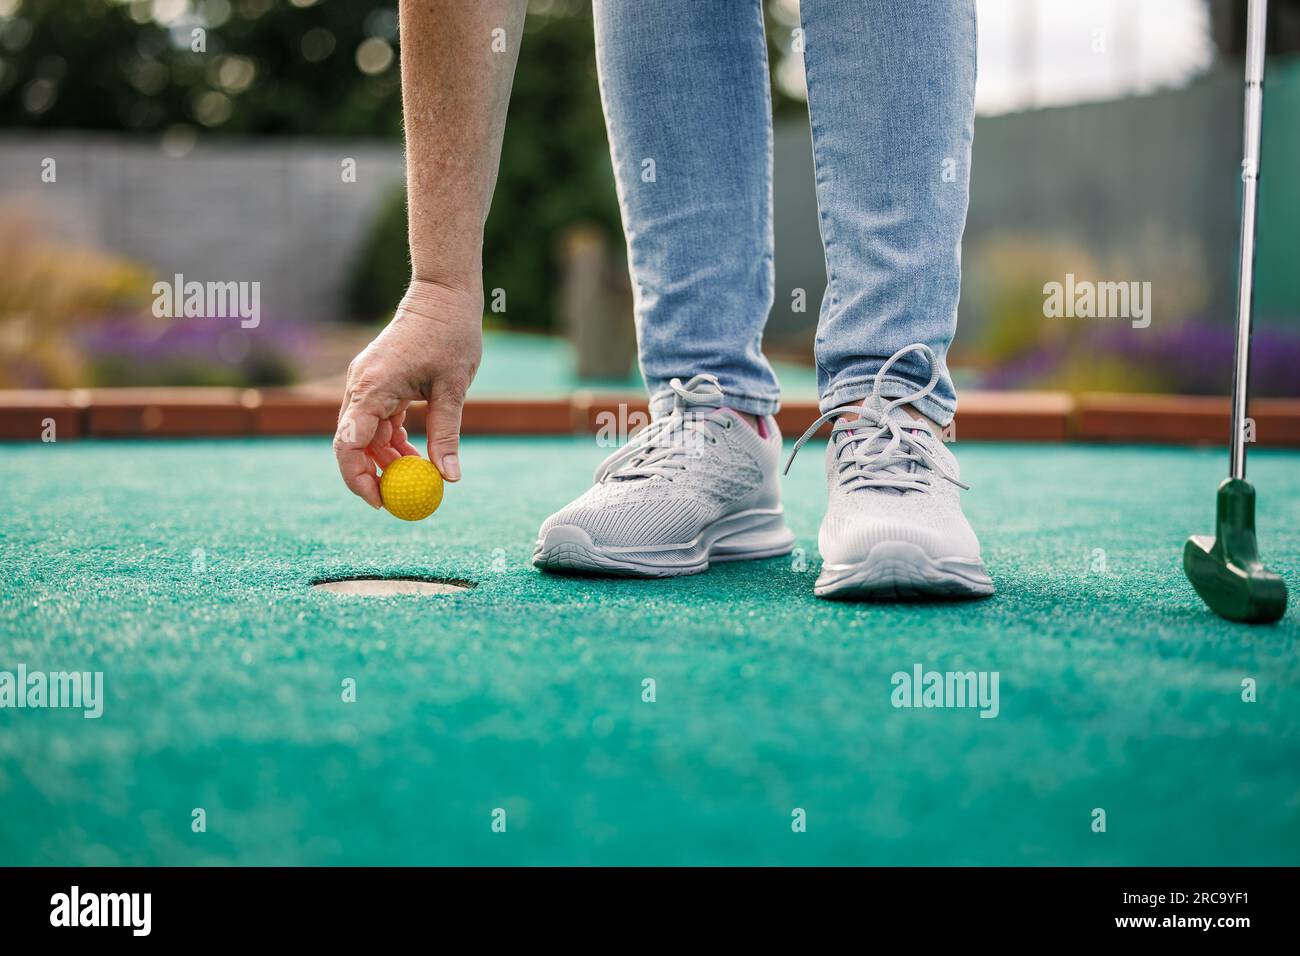 Woman plays mini golf and taking ball out from the hole after successful putting Stock Photo